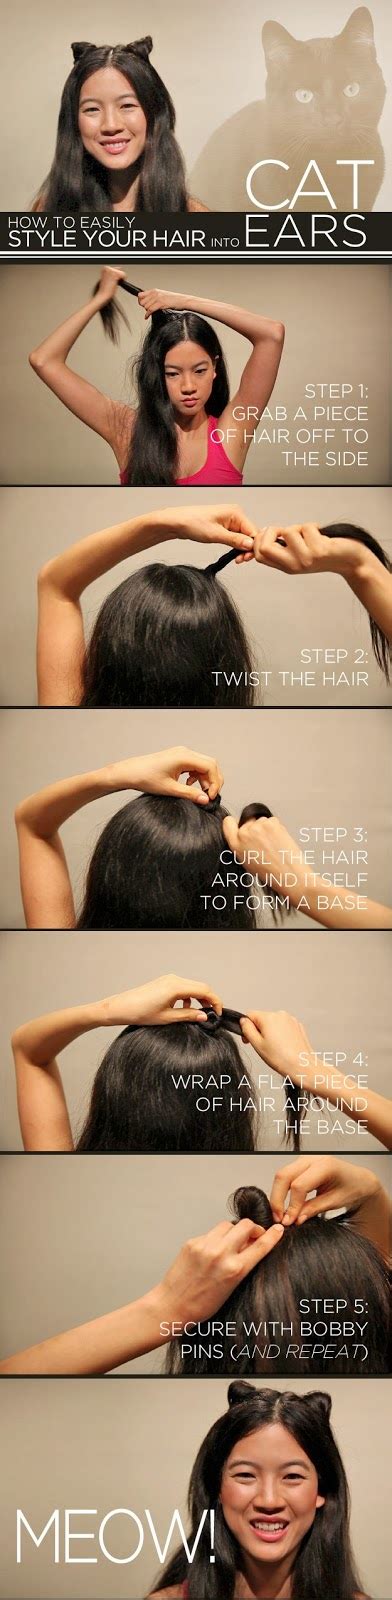 This could compact, rather than remove, buildup. Style your Hair in to Cat Ears - DIY | DIY & Crafts